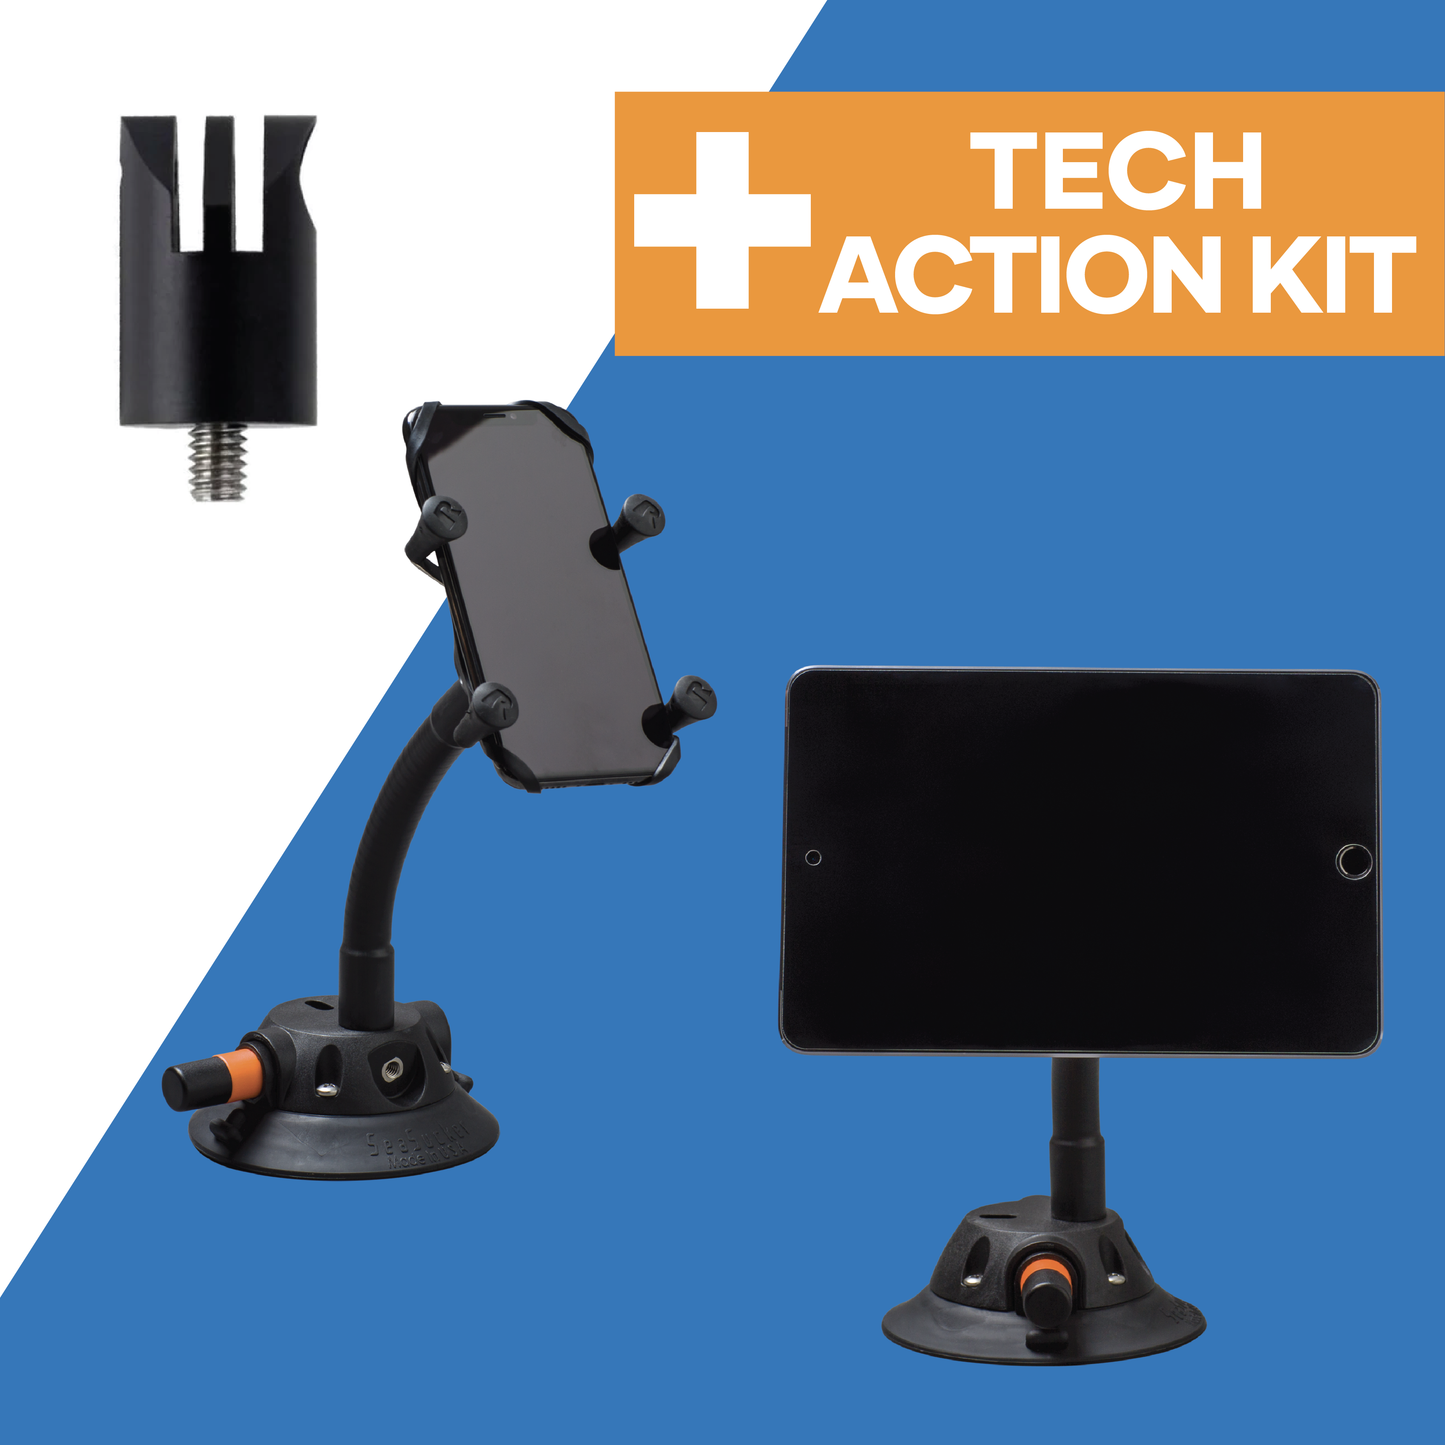 The Tech Action Kit